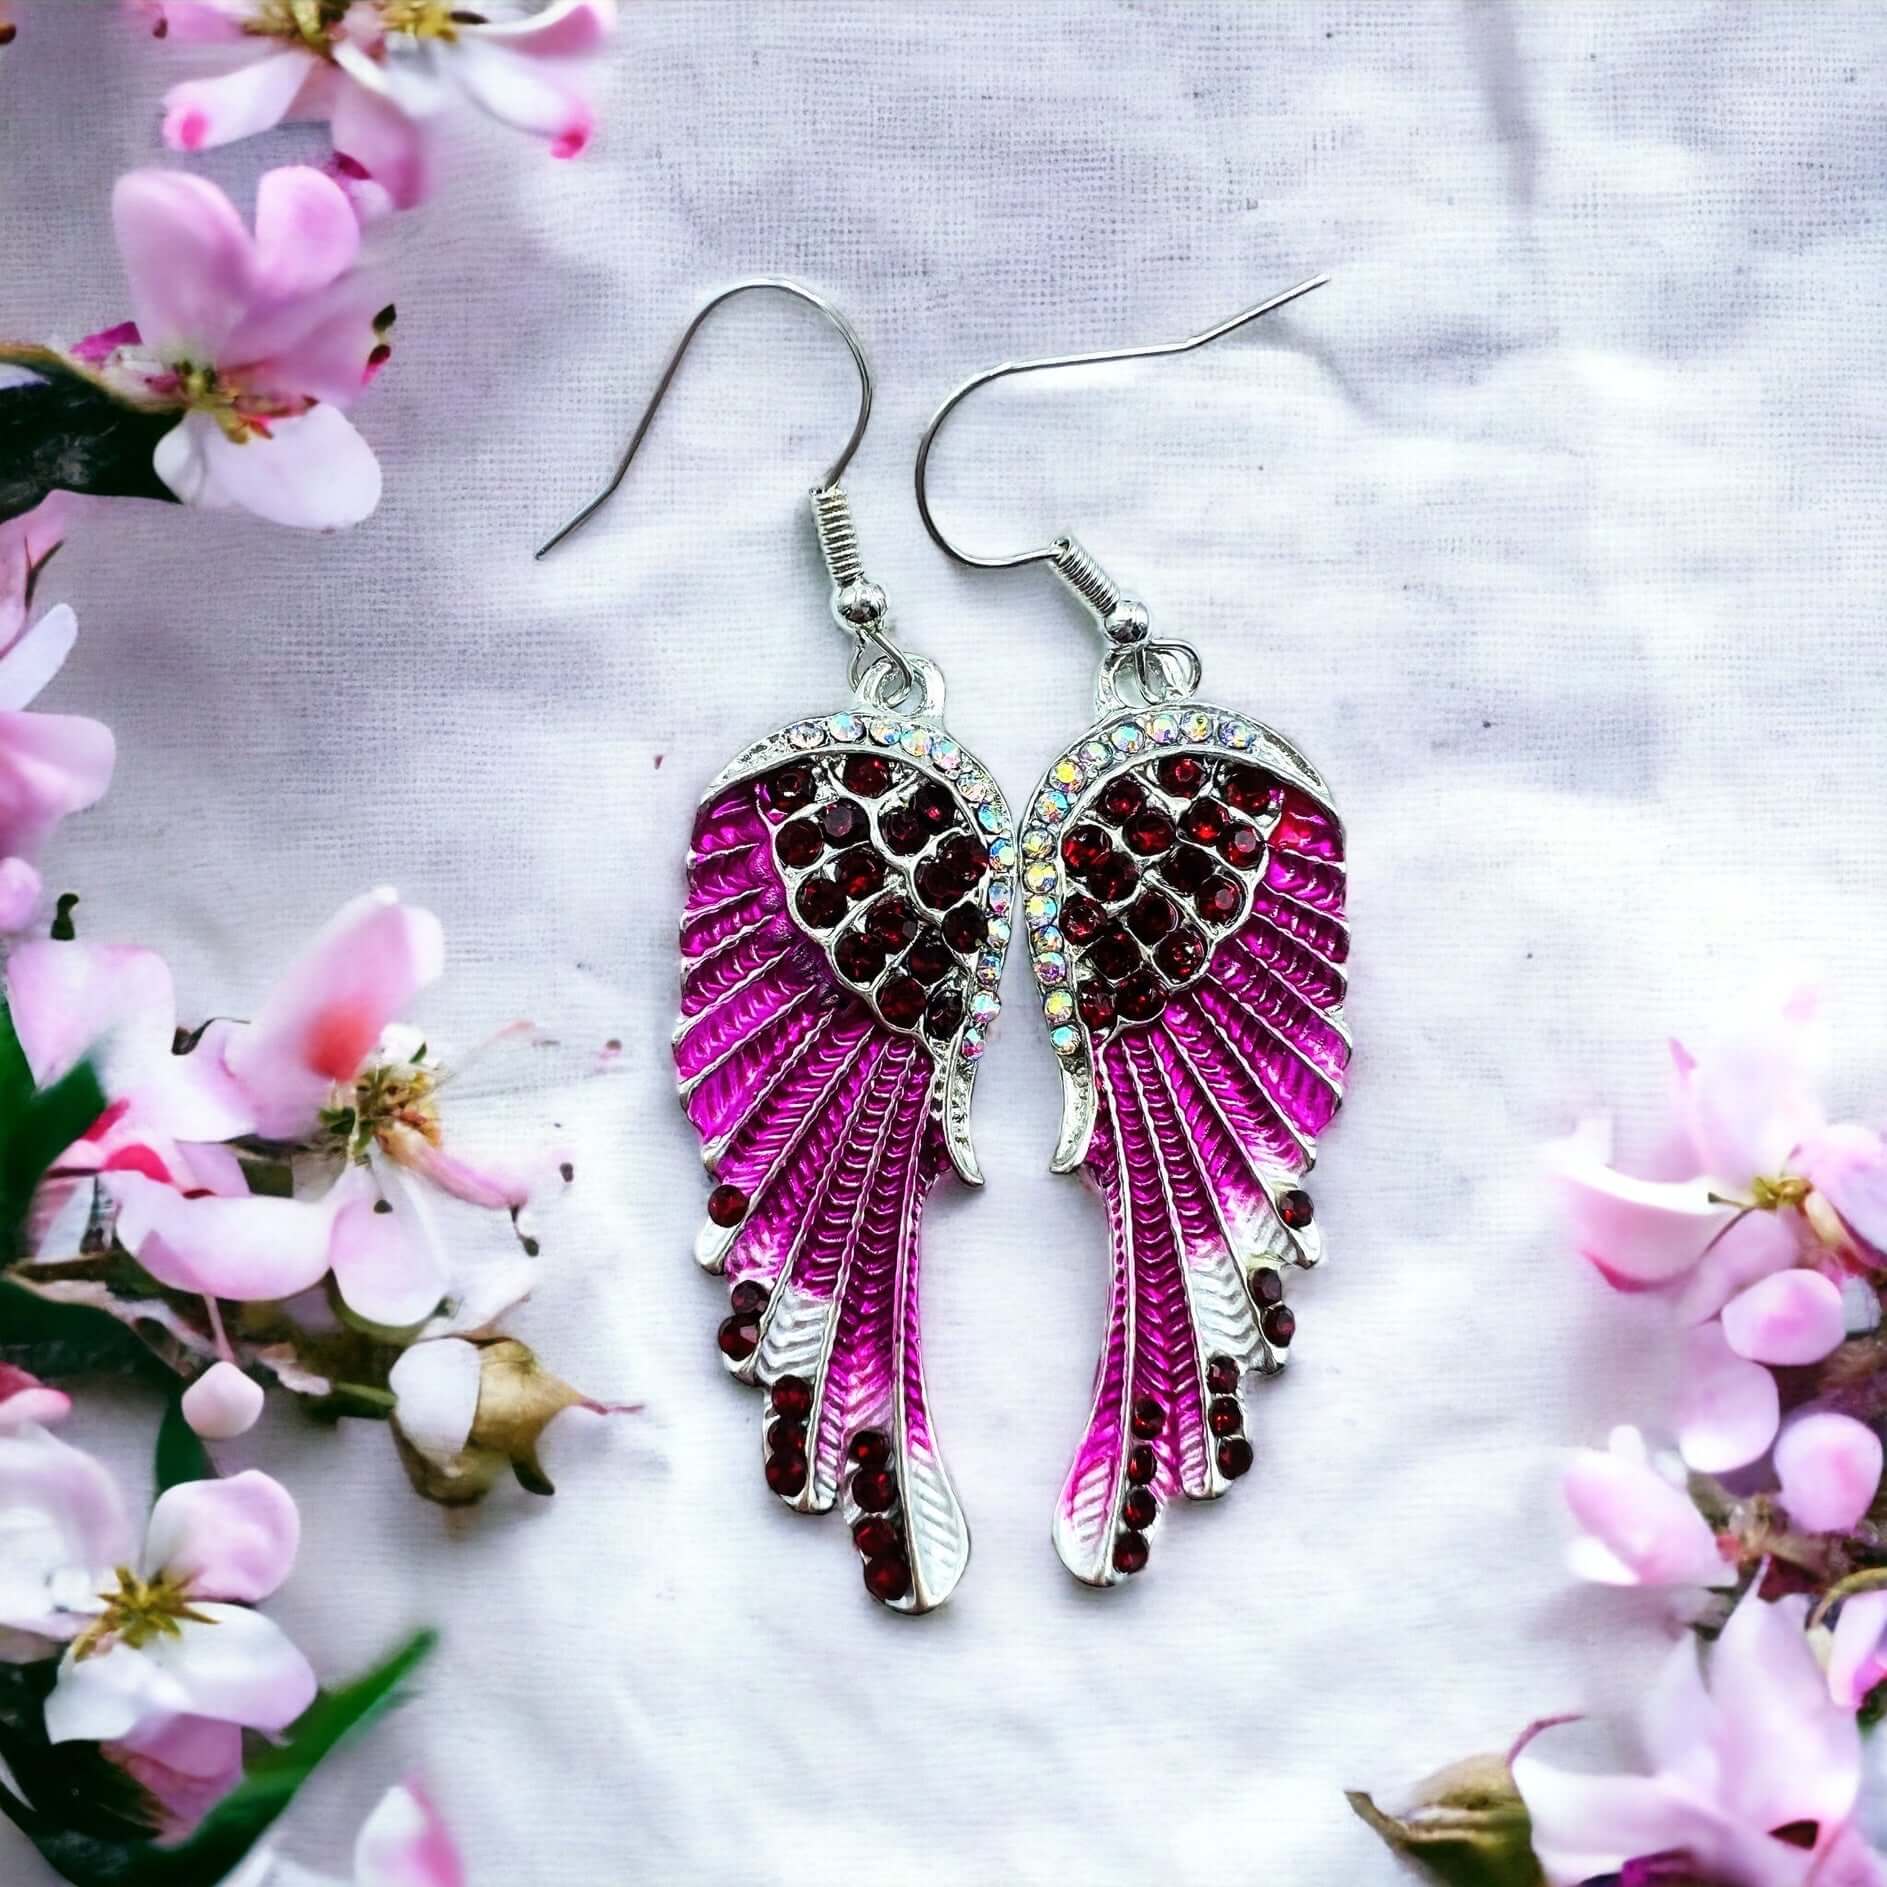 Pink Angel wing earrings with diamanté